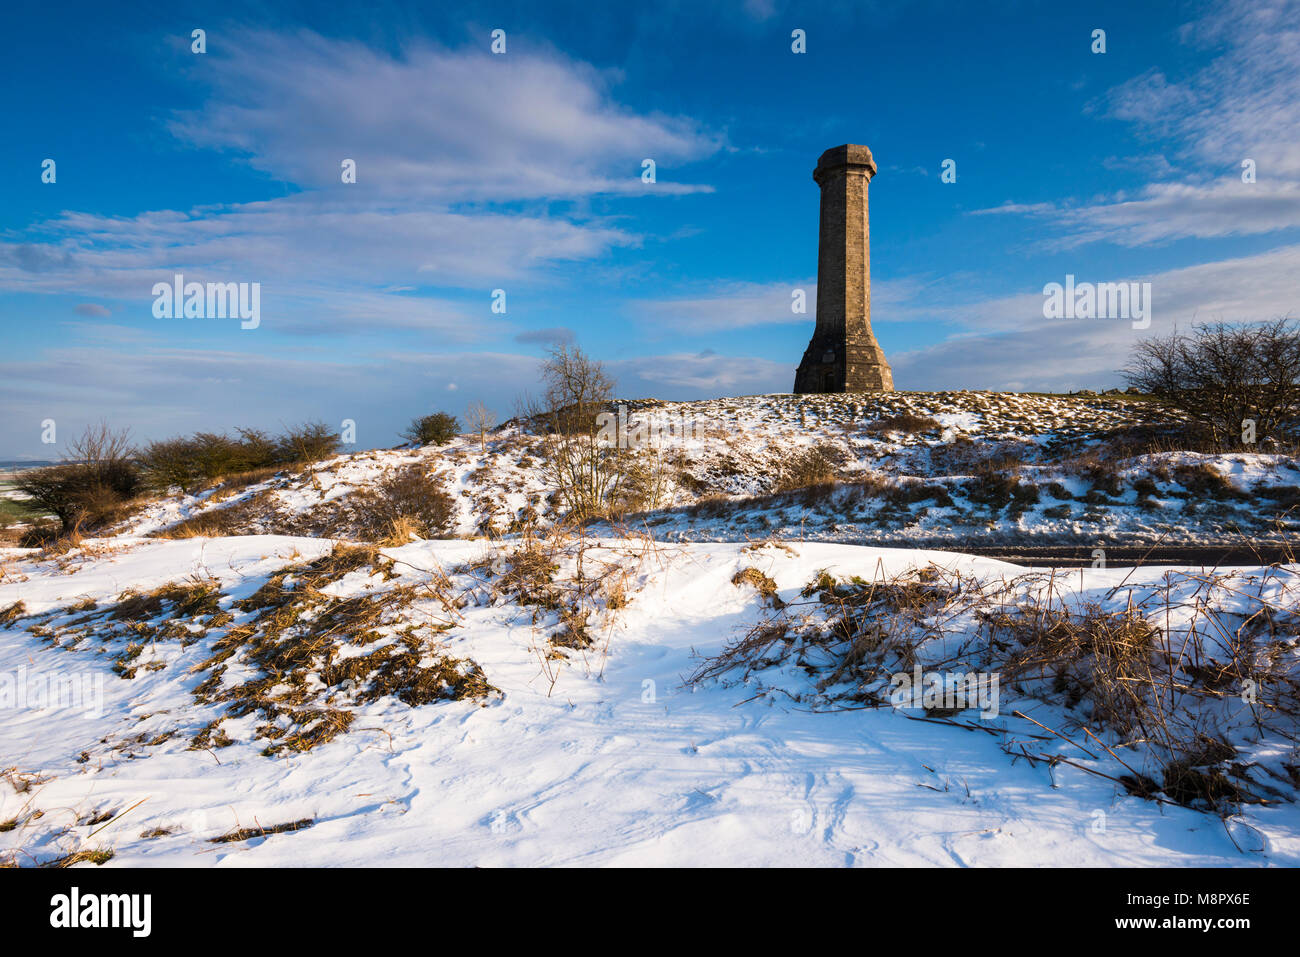 Hardy's Monument, Portesham, Dorset, UK.  19th March 2018.  UK Weather.  Snow at Hardy's Monument on Black Down near Portesham in Dorset on an afternoon of sunny spells but cold winds.  The monument was built in memory of Vice Admiral Sir Thomas Masterman Hardy who was captain of HMS Victory in the Battle of Trafalgar under Admiral Nelson.  Picture Credit: Graham Hunt/Alamy Live News. Stock Photo